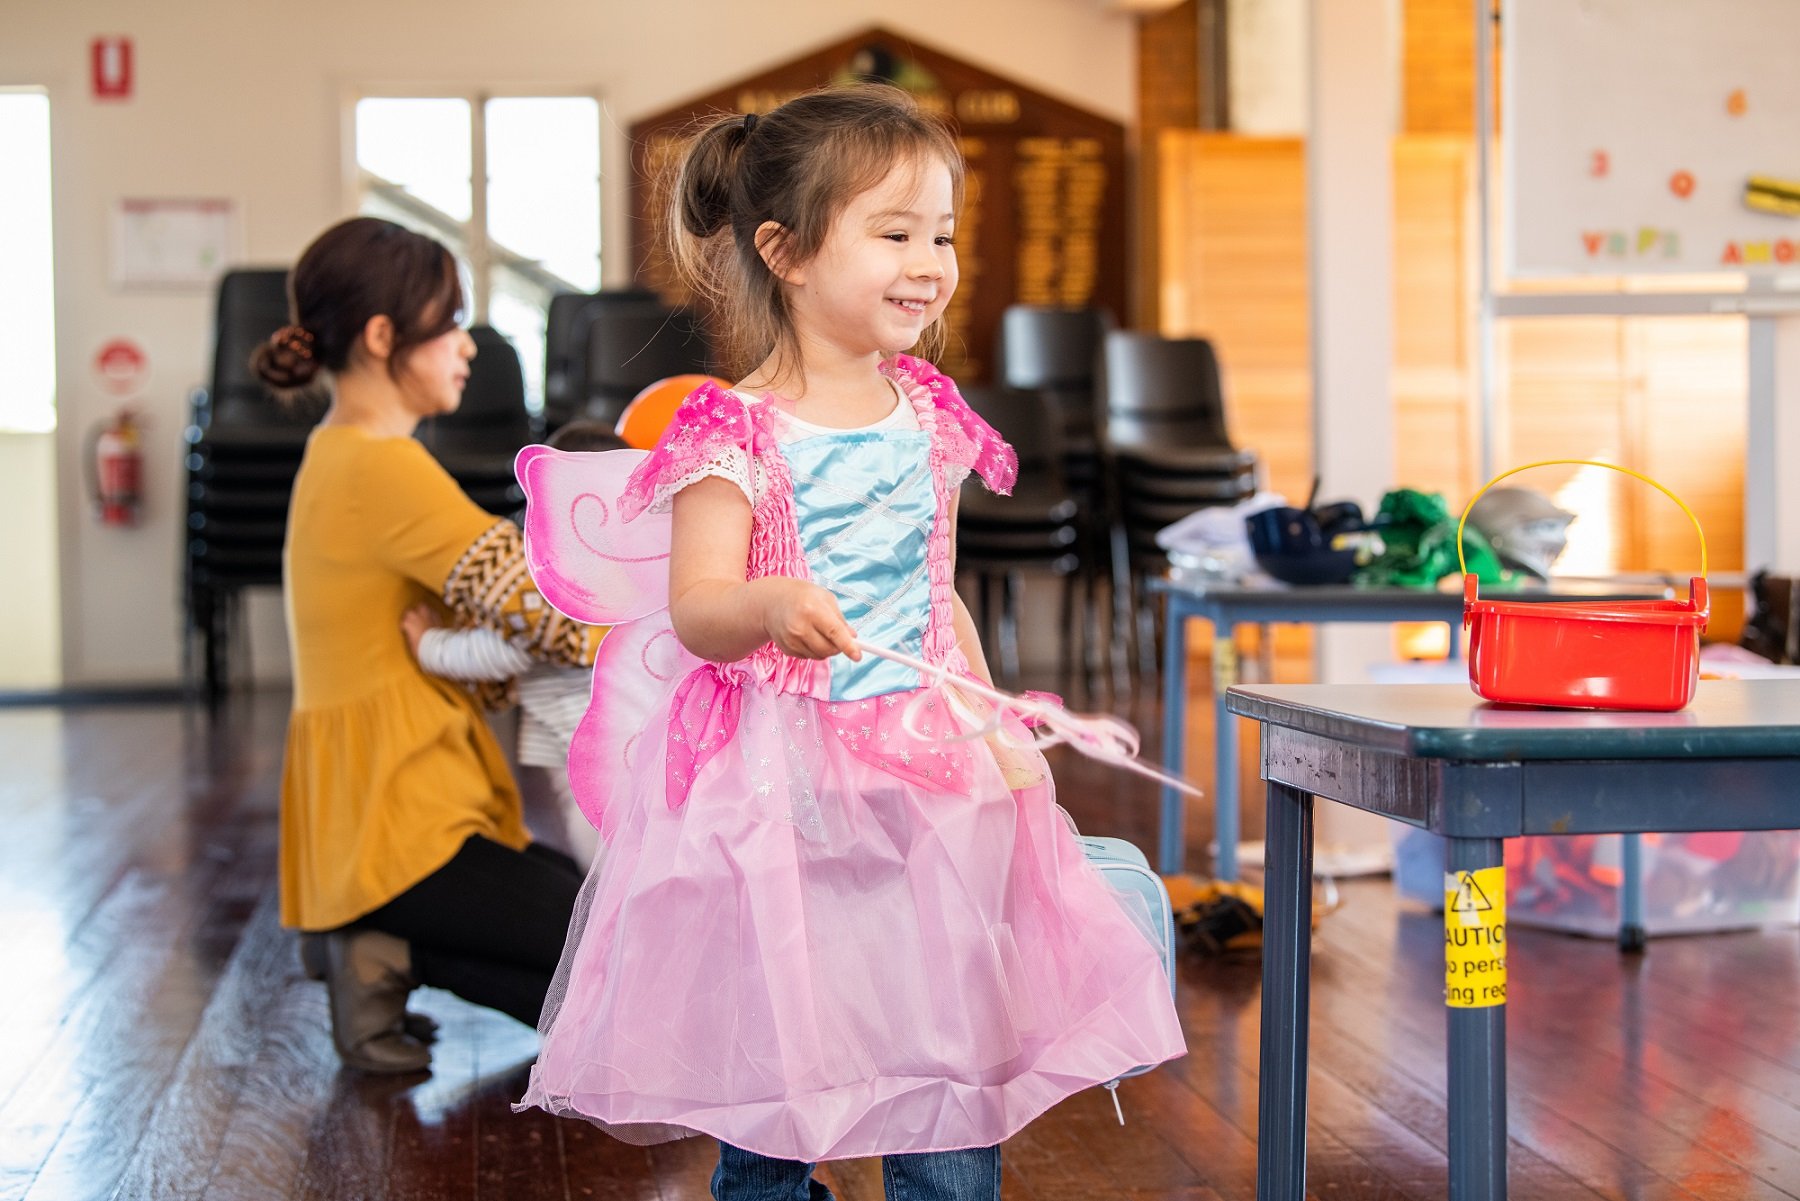 Child engaging in imaginative play, dressed up as a pink fairy.